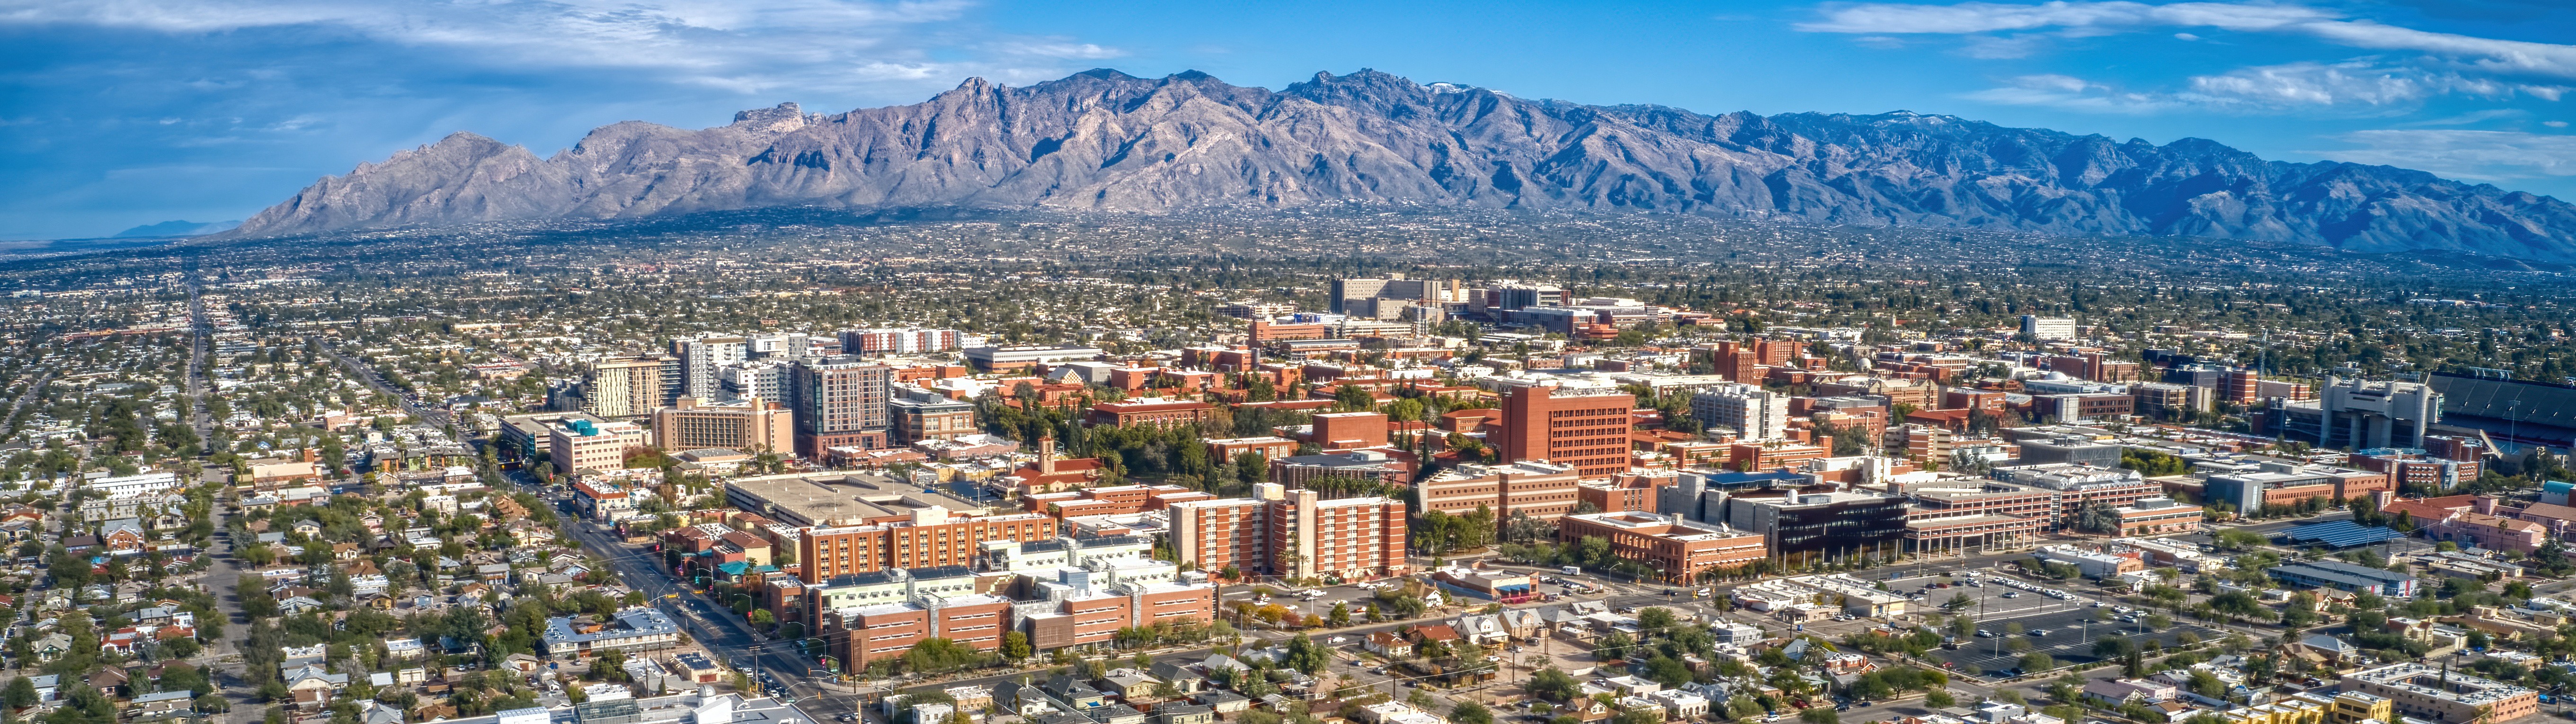 A bird's eye view of the University of Arizona and the surrounding areas